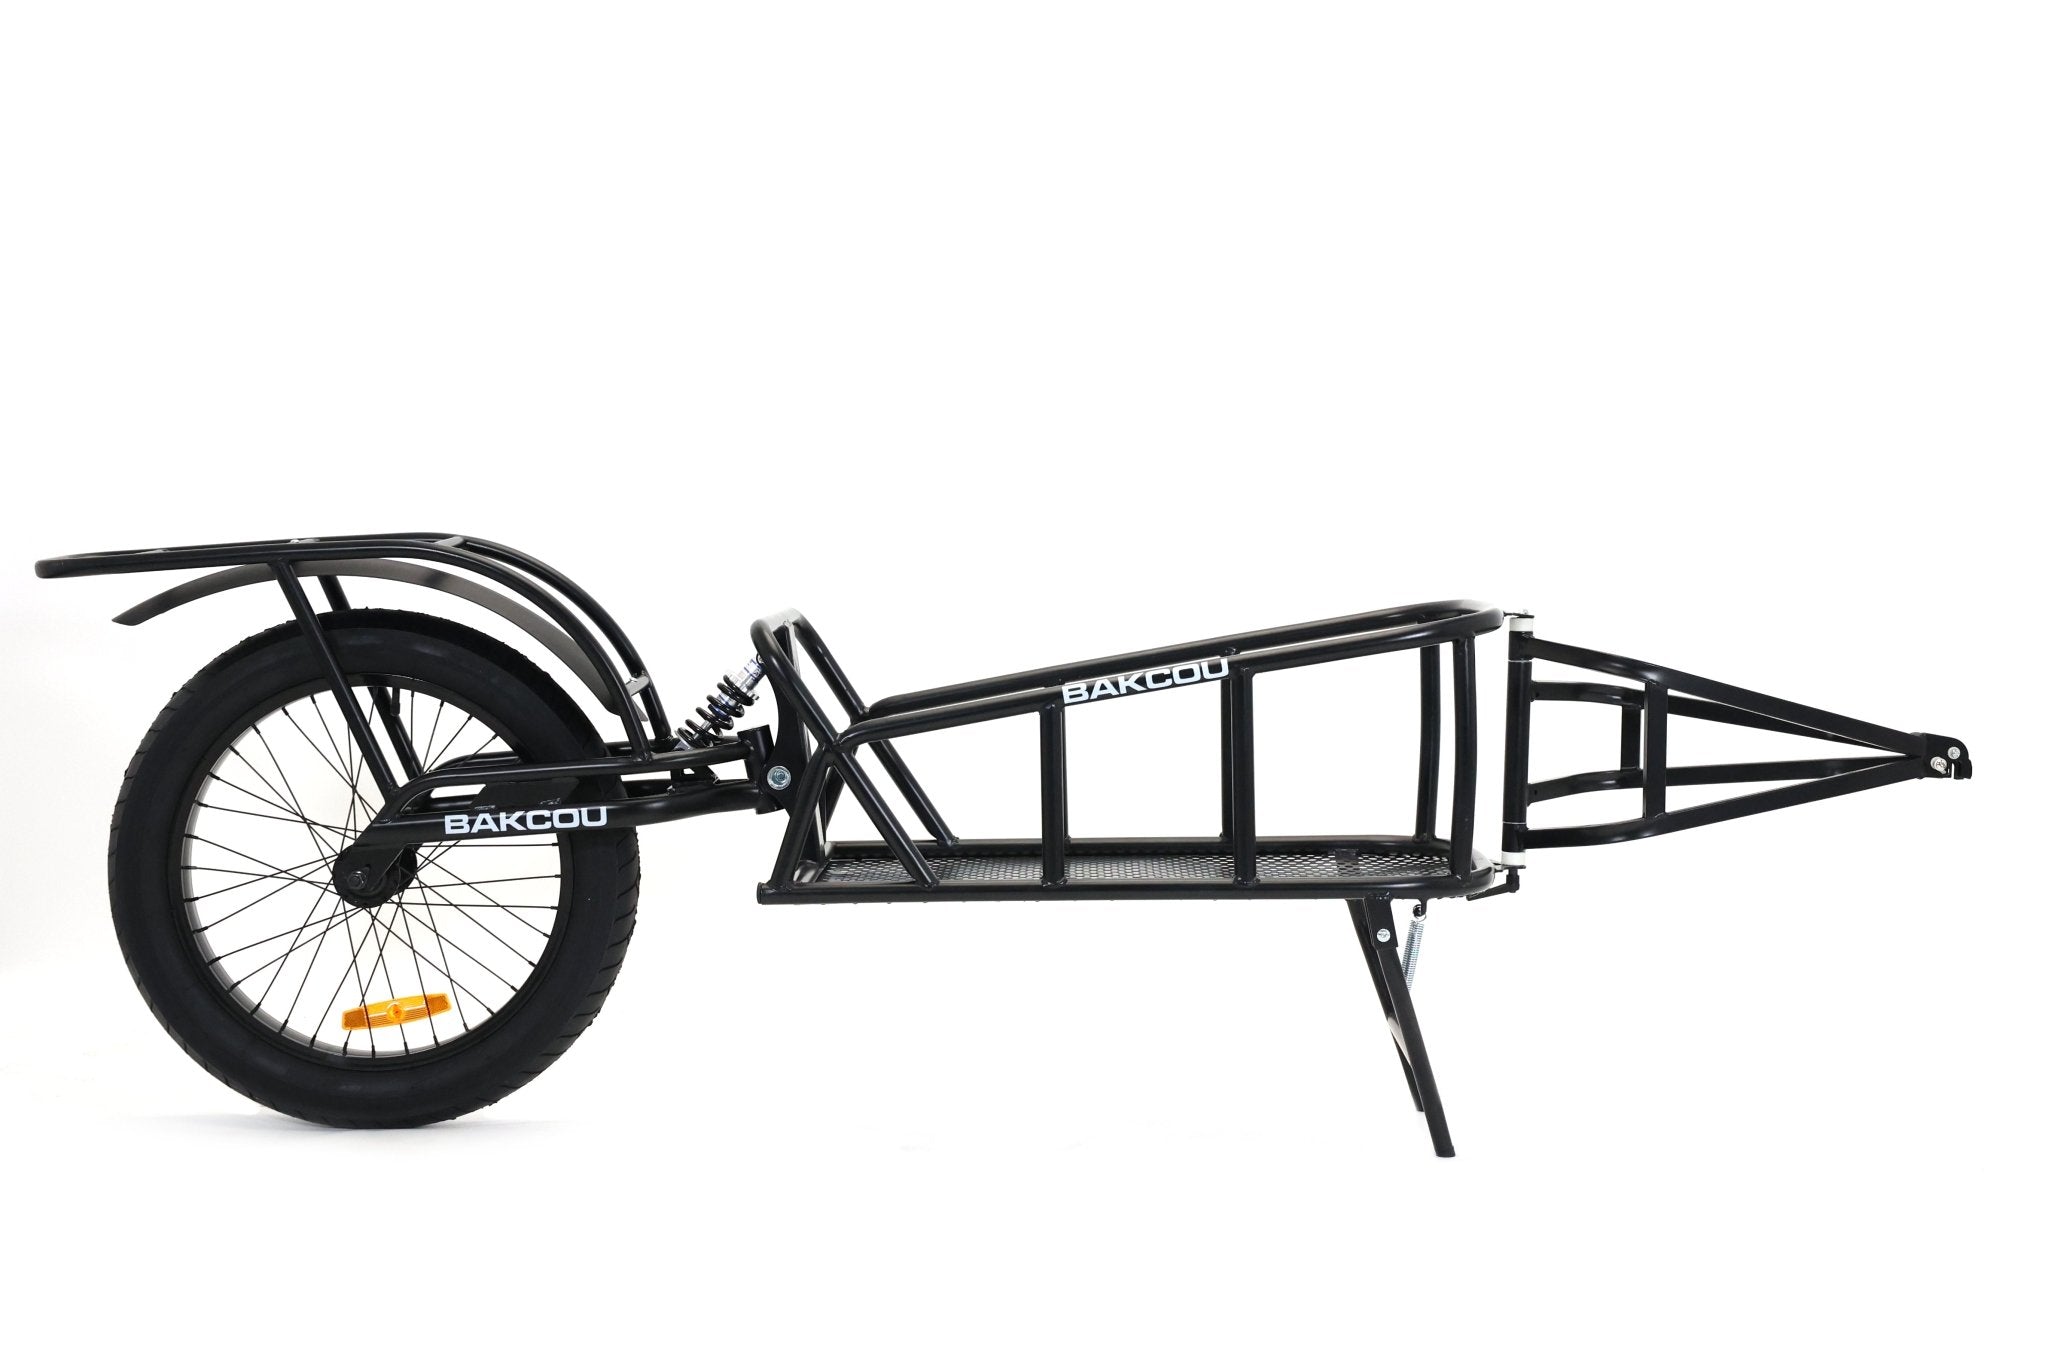 Single Wheel Trailer - Compatible with Mule and Storm - Bakcou